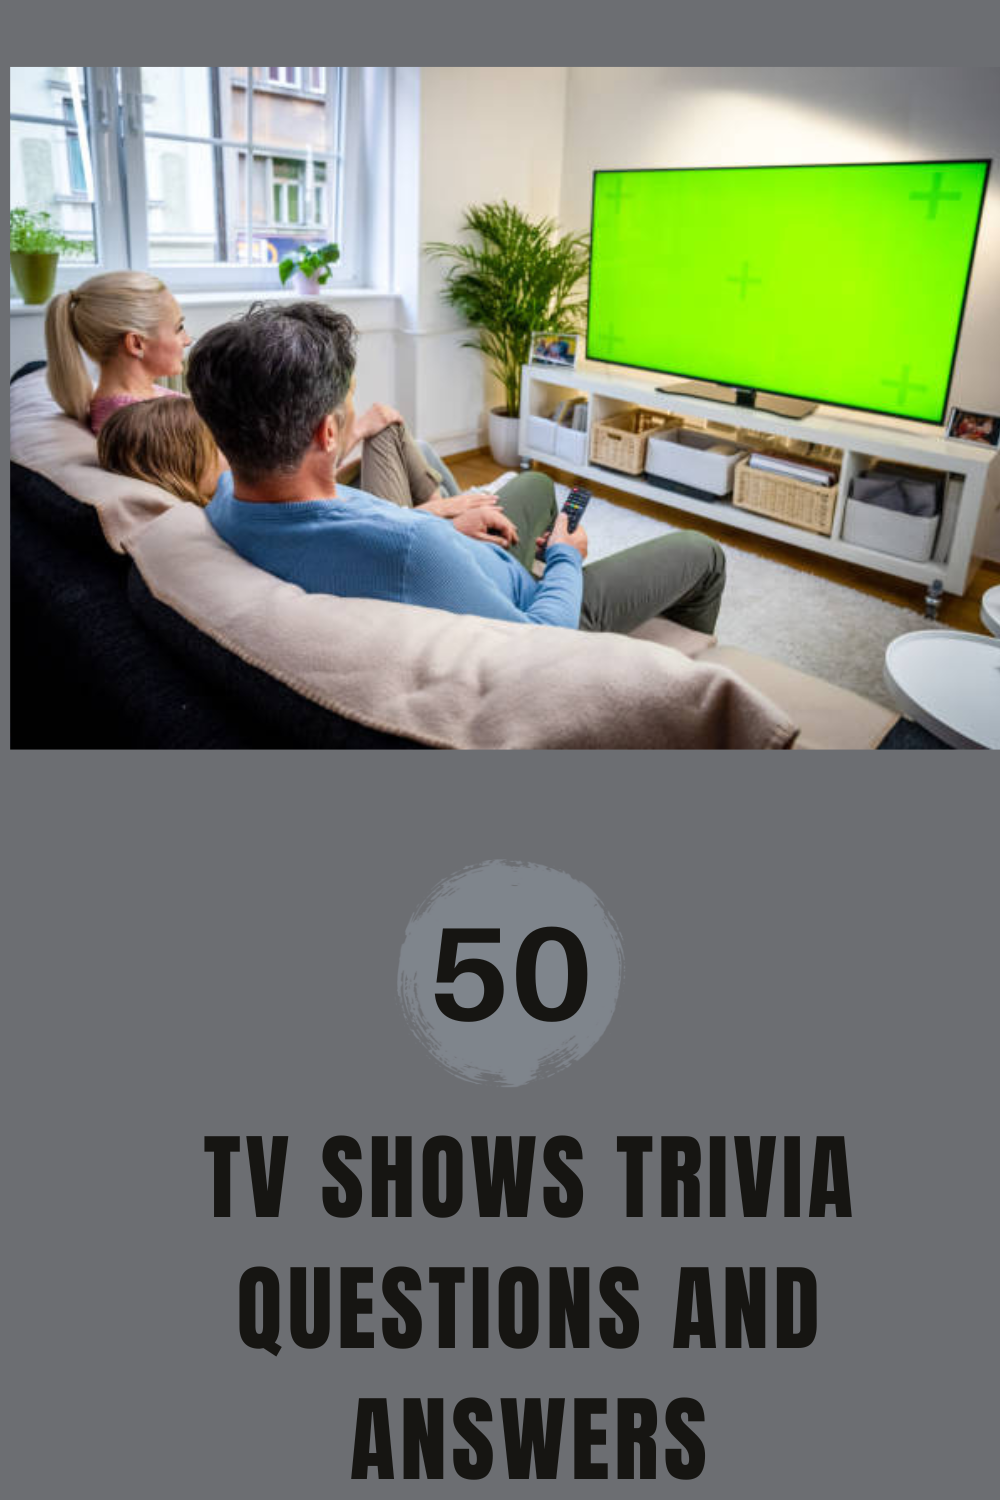 50 Tv Shows Trivia Questions and Answers